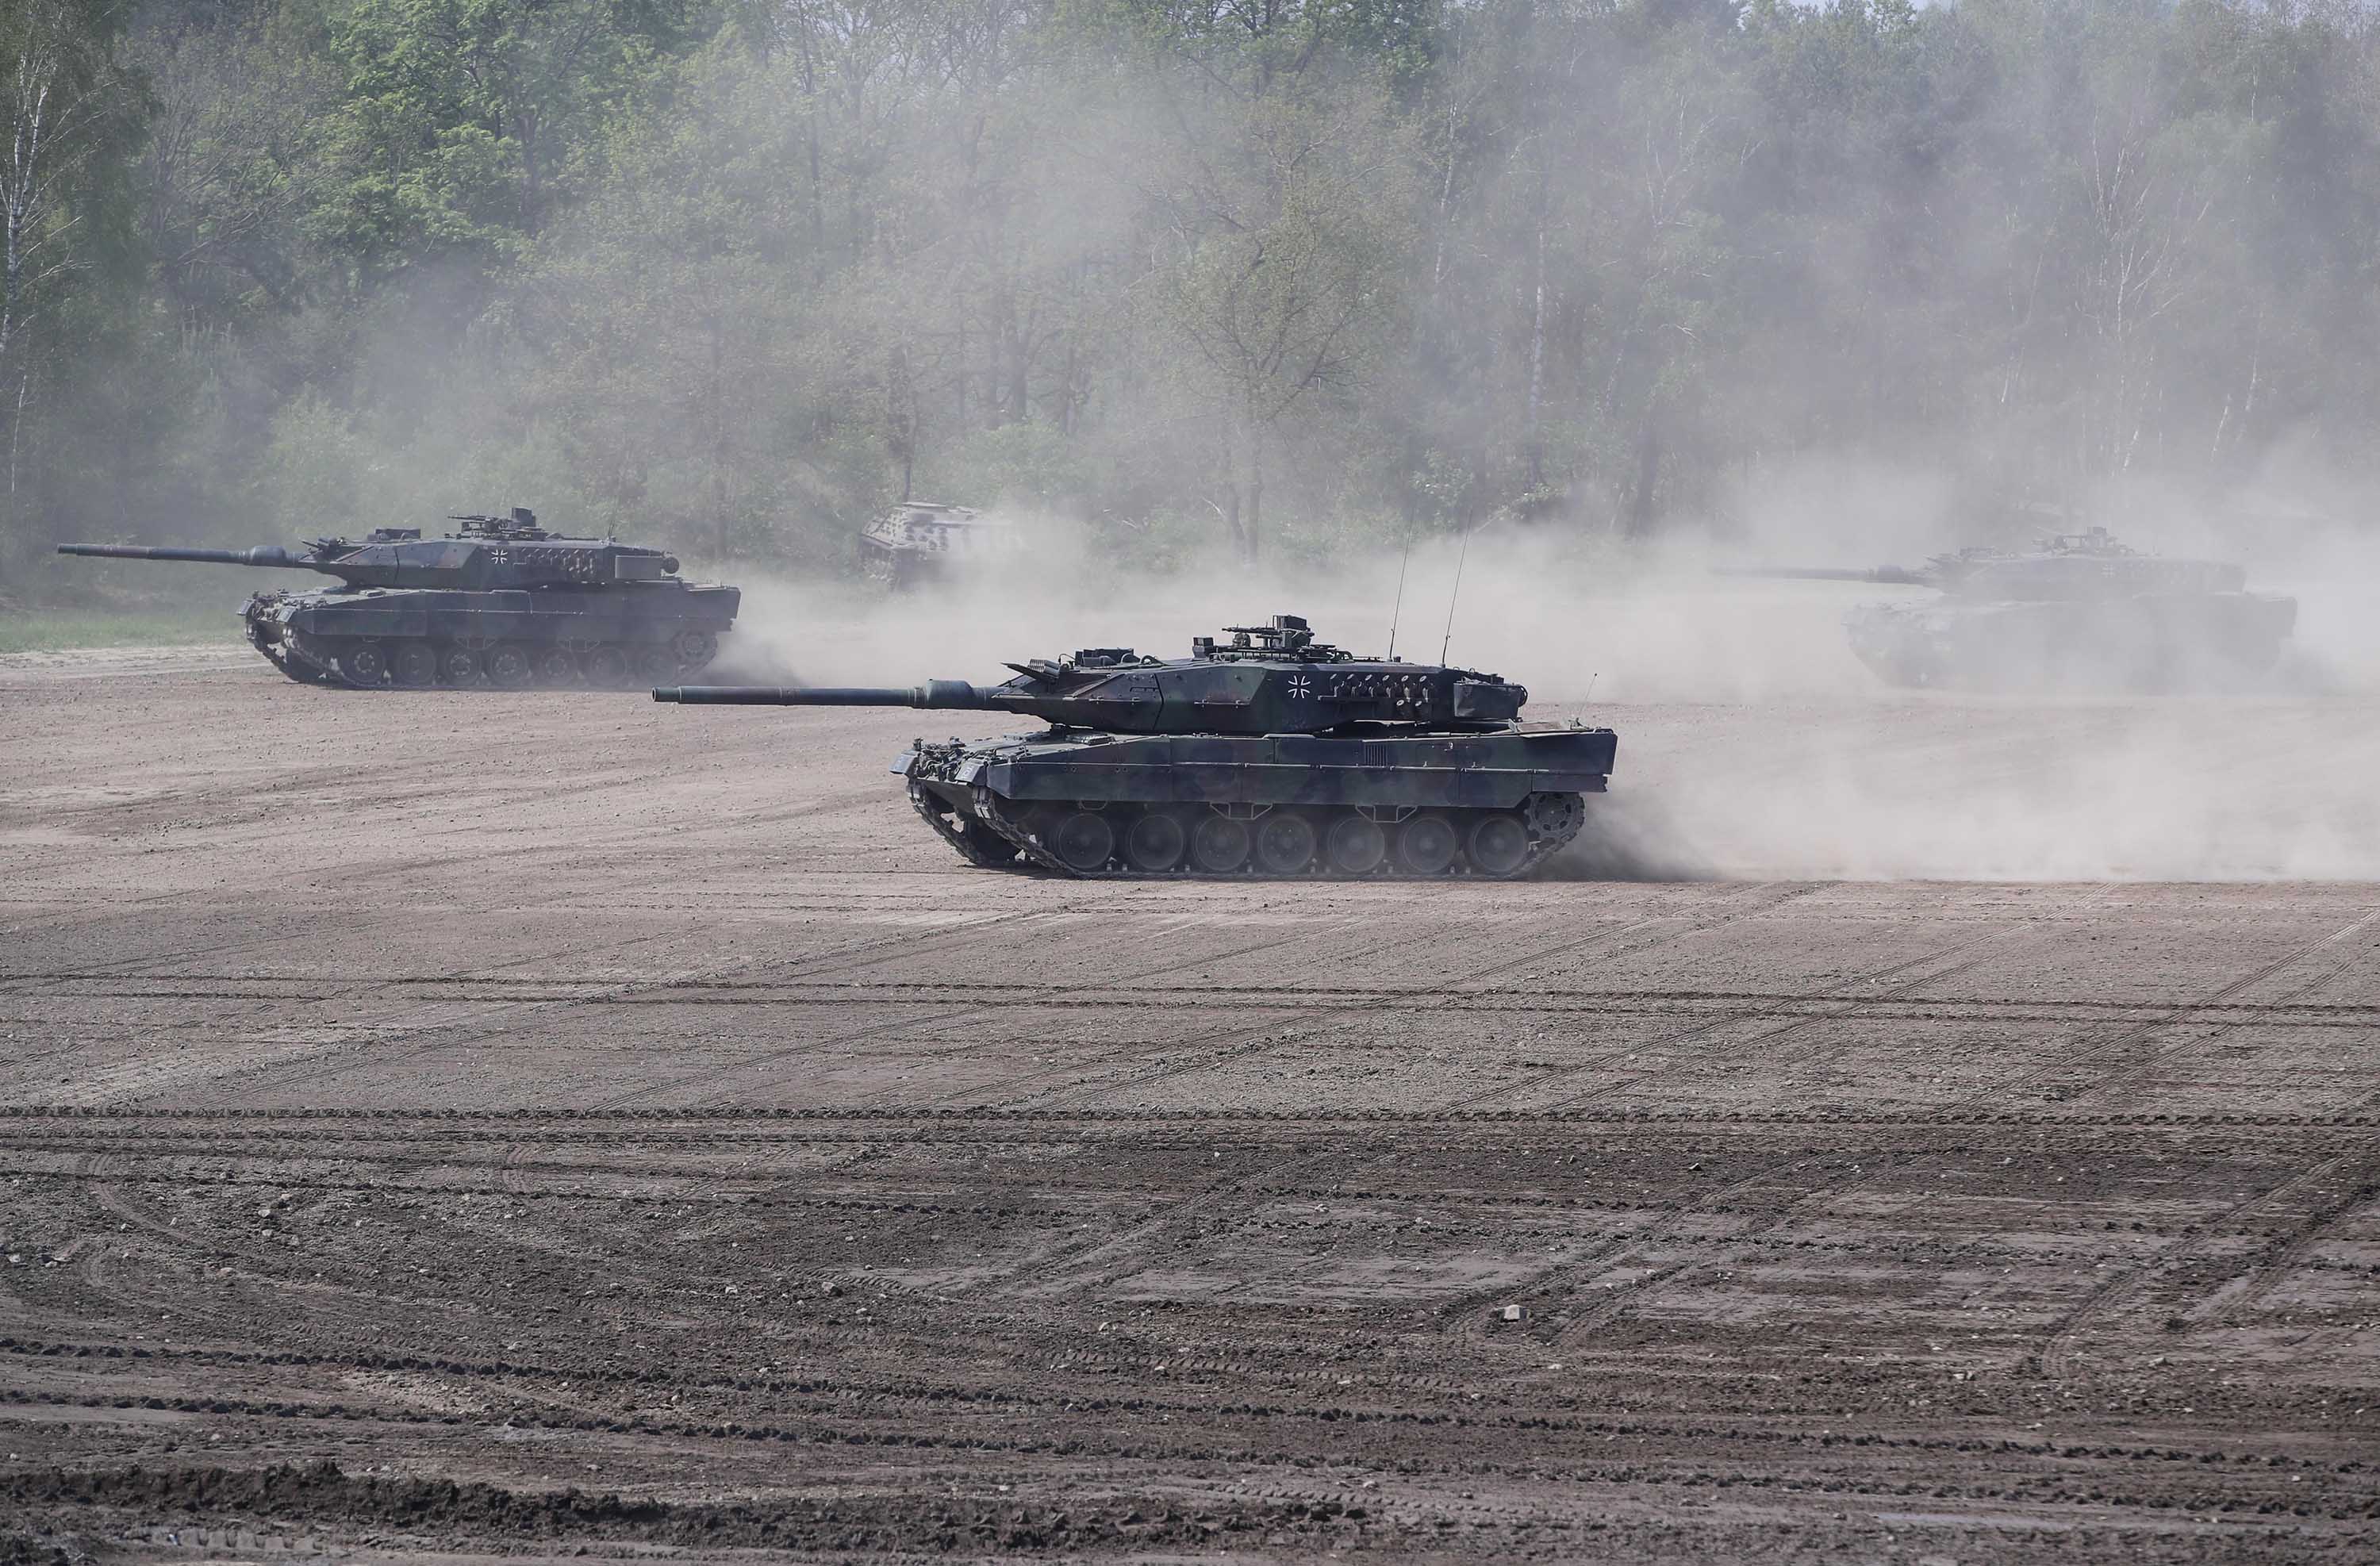 A file image shows Leopard 2 tanks in action during a training demonstration in Munster, Germany, in May 2019.